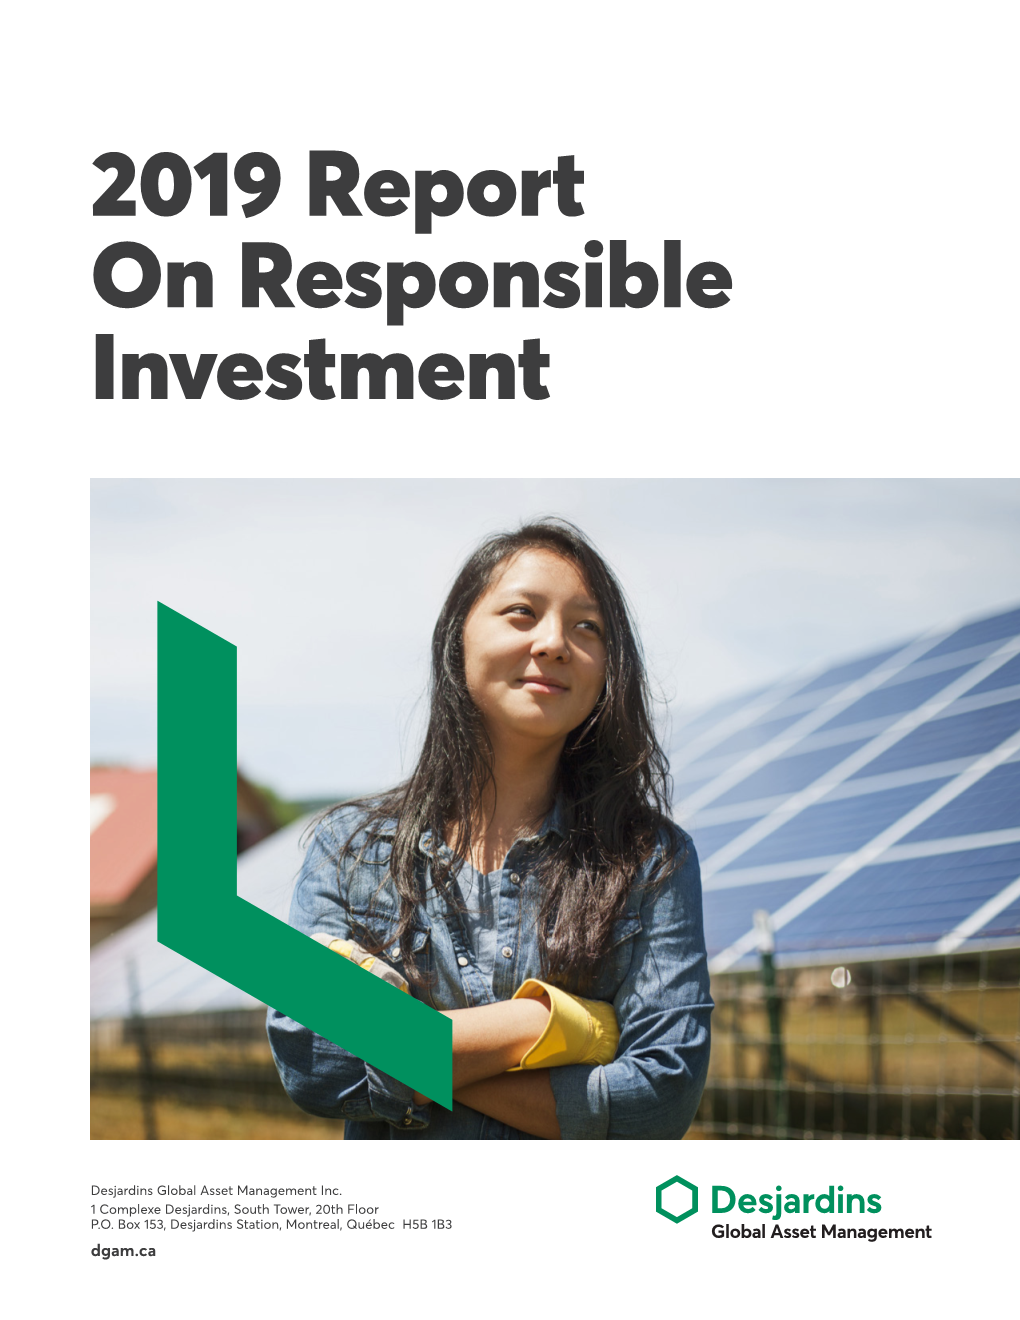 2019 Report on Responsible Investment